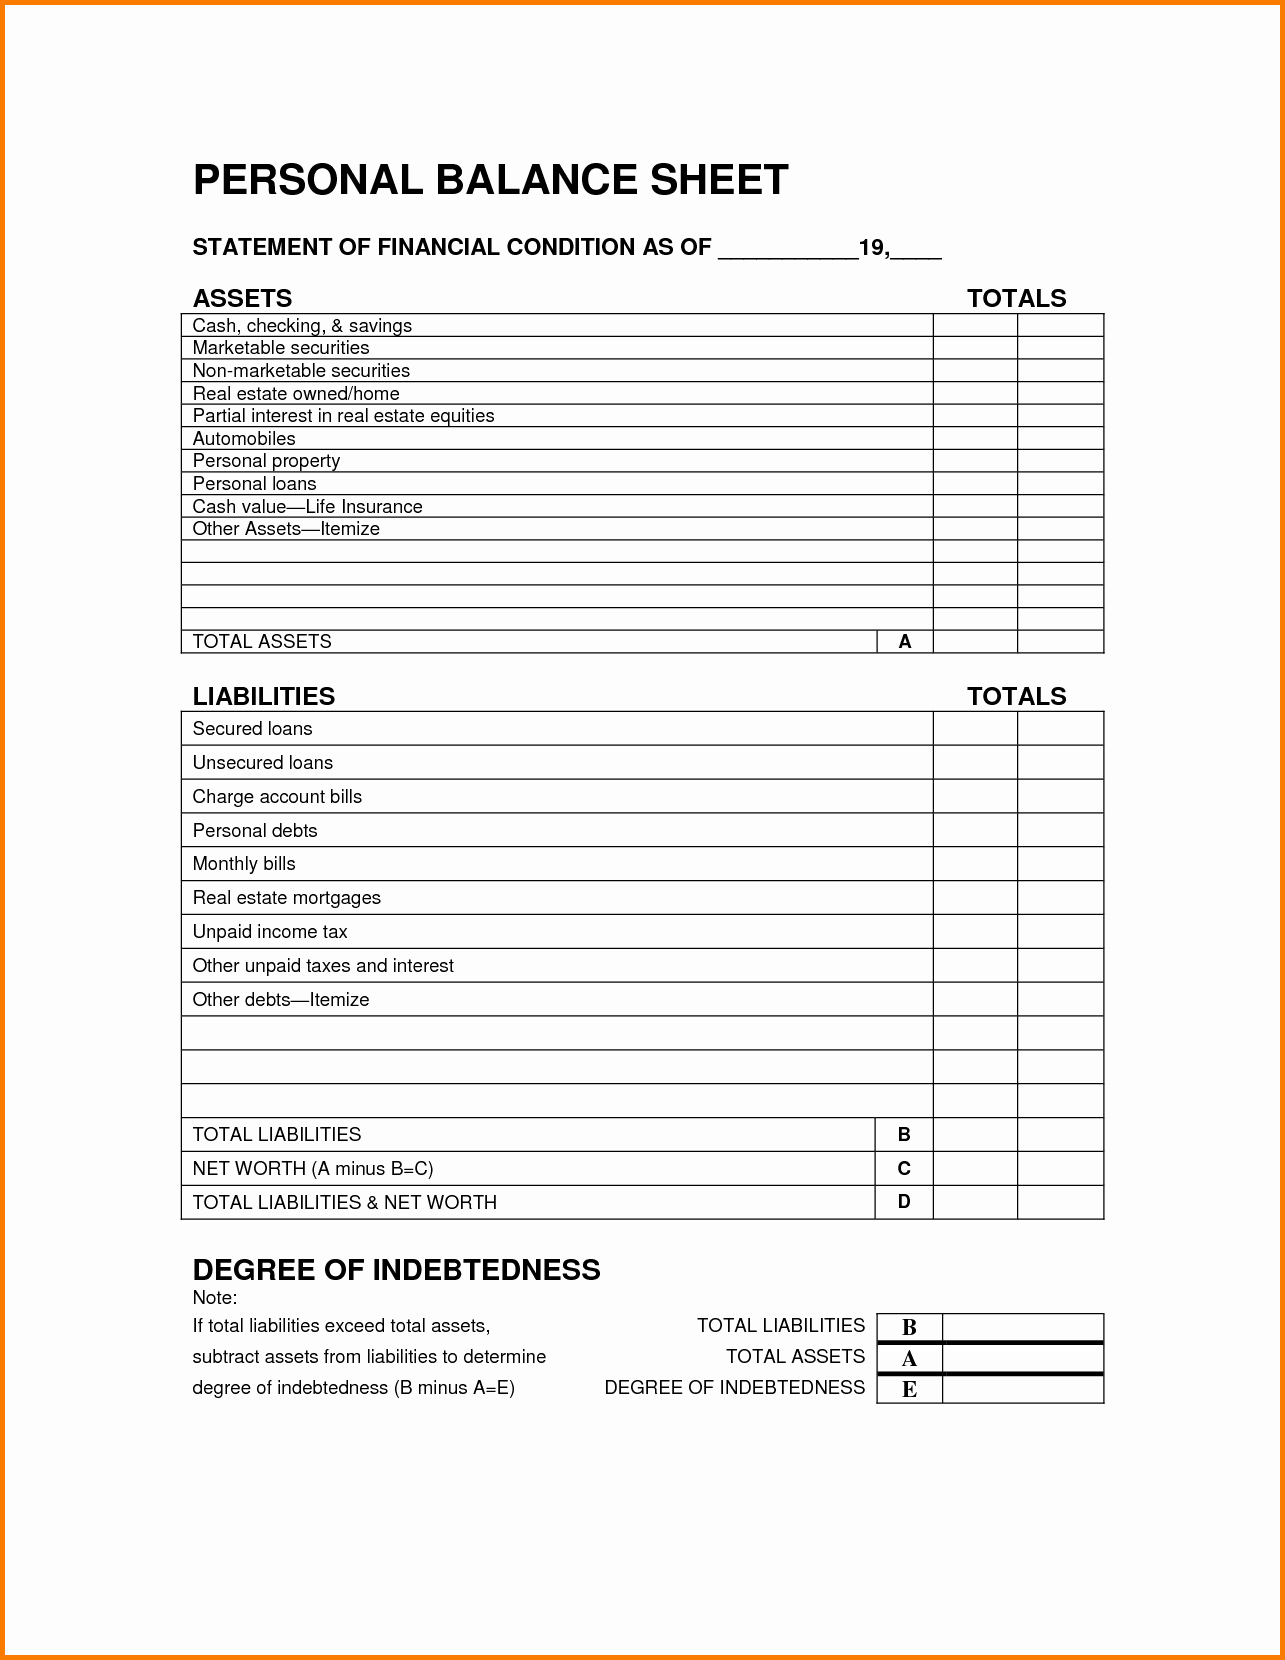 Personal Balance Sheet Template Excel Best Of Personal Balance Sheet Template